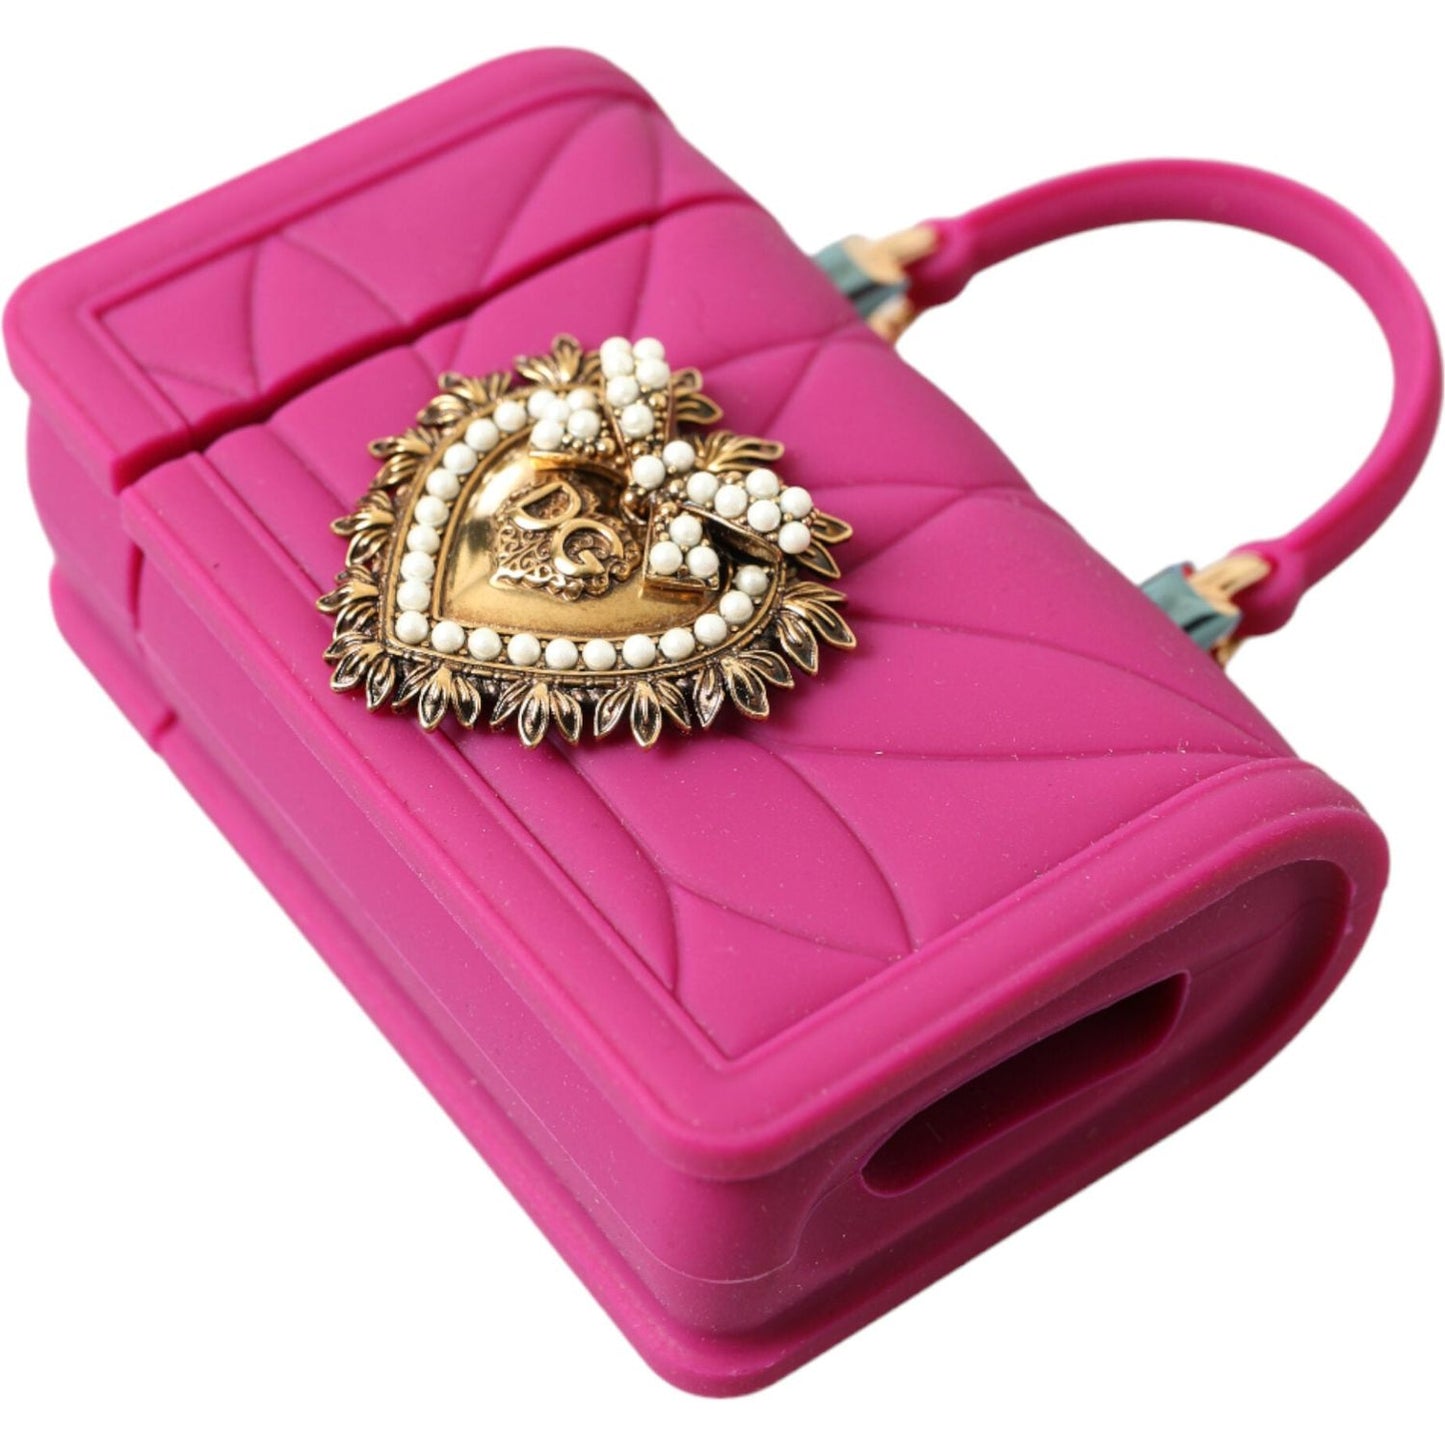 Dolce & Gabbana Chic Quilted Silicone Airpods Case - Pink & Gold pink-silicone-devotion-heart-bag-gold-chain-airpods-case 465A6730-BG-scaled-bd6ffa67-20a.jpg